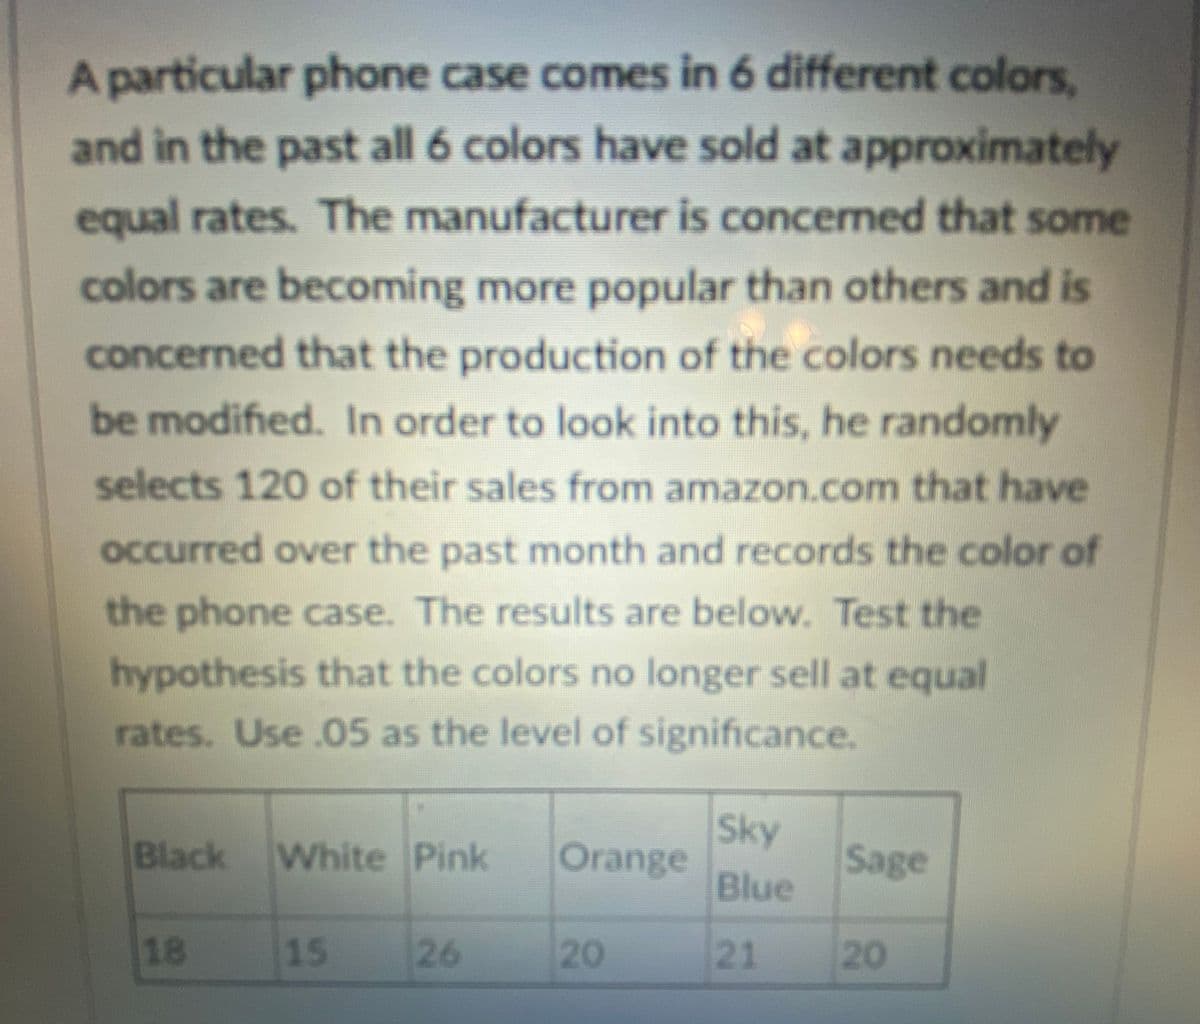 A particular phone case comes in 6 different colors,
and in the past all 6 colors have sold at approximately
equal rates. The manufacturer is concermed that some
colors are becoming more popular than others and is
concerned that the production of the colors needs to
be modified. In order to look into this, he randomly
selects 120 of their sales from amazon.com that have
occurred over the past month and records the color of
the phone case. The results are below. Test the
hypothesis that the colors no longer sell at equal
rates. Use .05 as the level of significance.
Black White Pink
Sky
Orange
Sage
Blue
18
15
26
20
21
20
